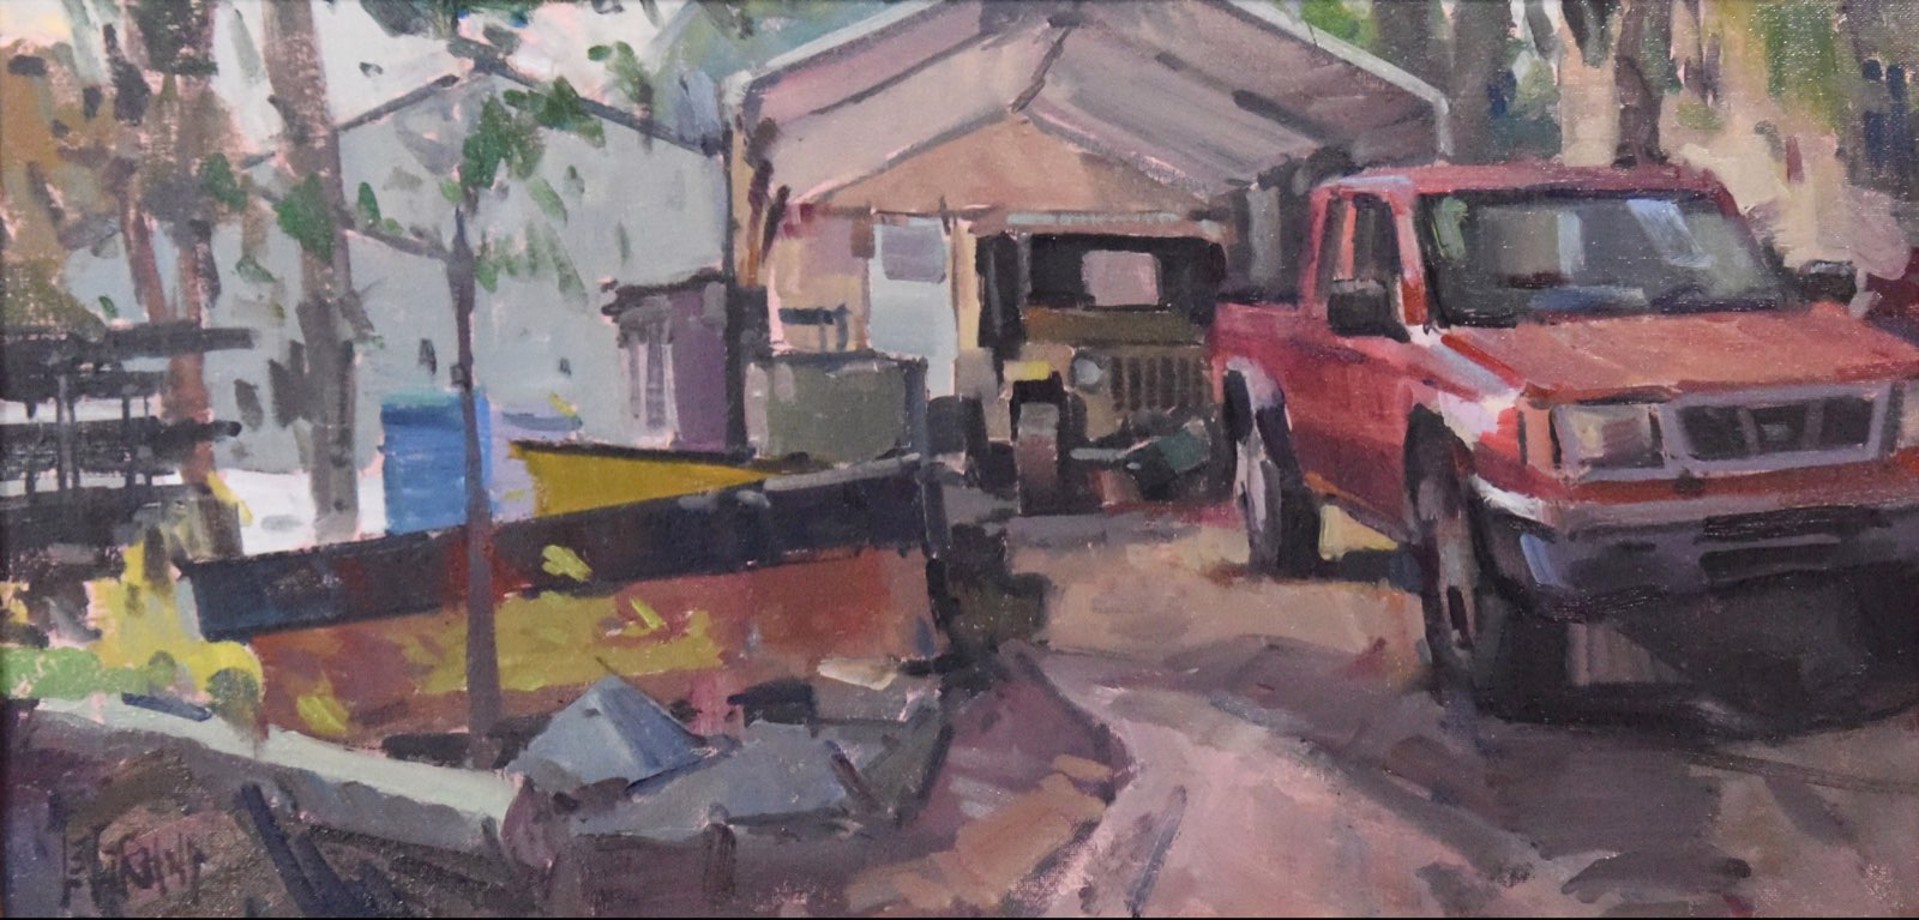 Truck and Other Things by Wyatt LeGrand